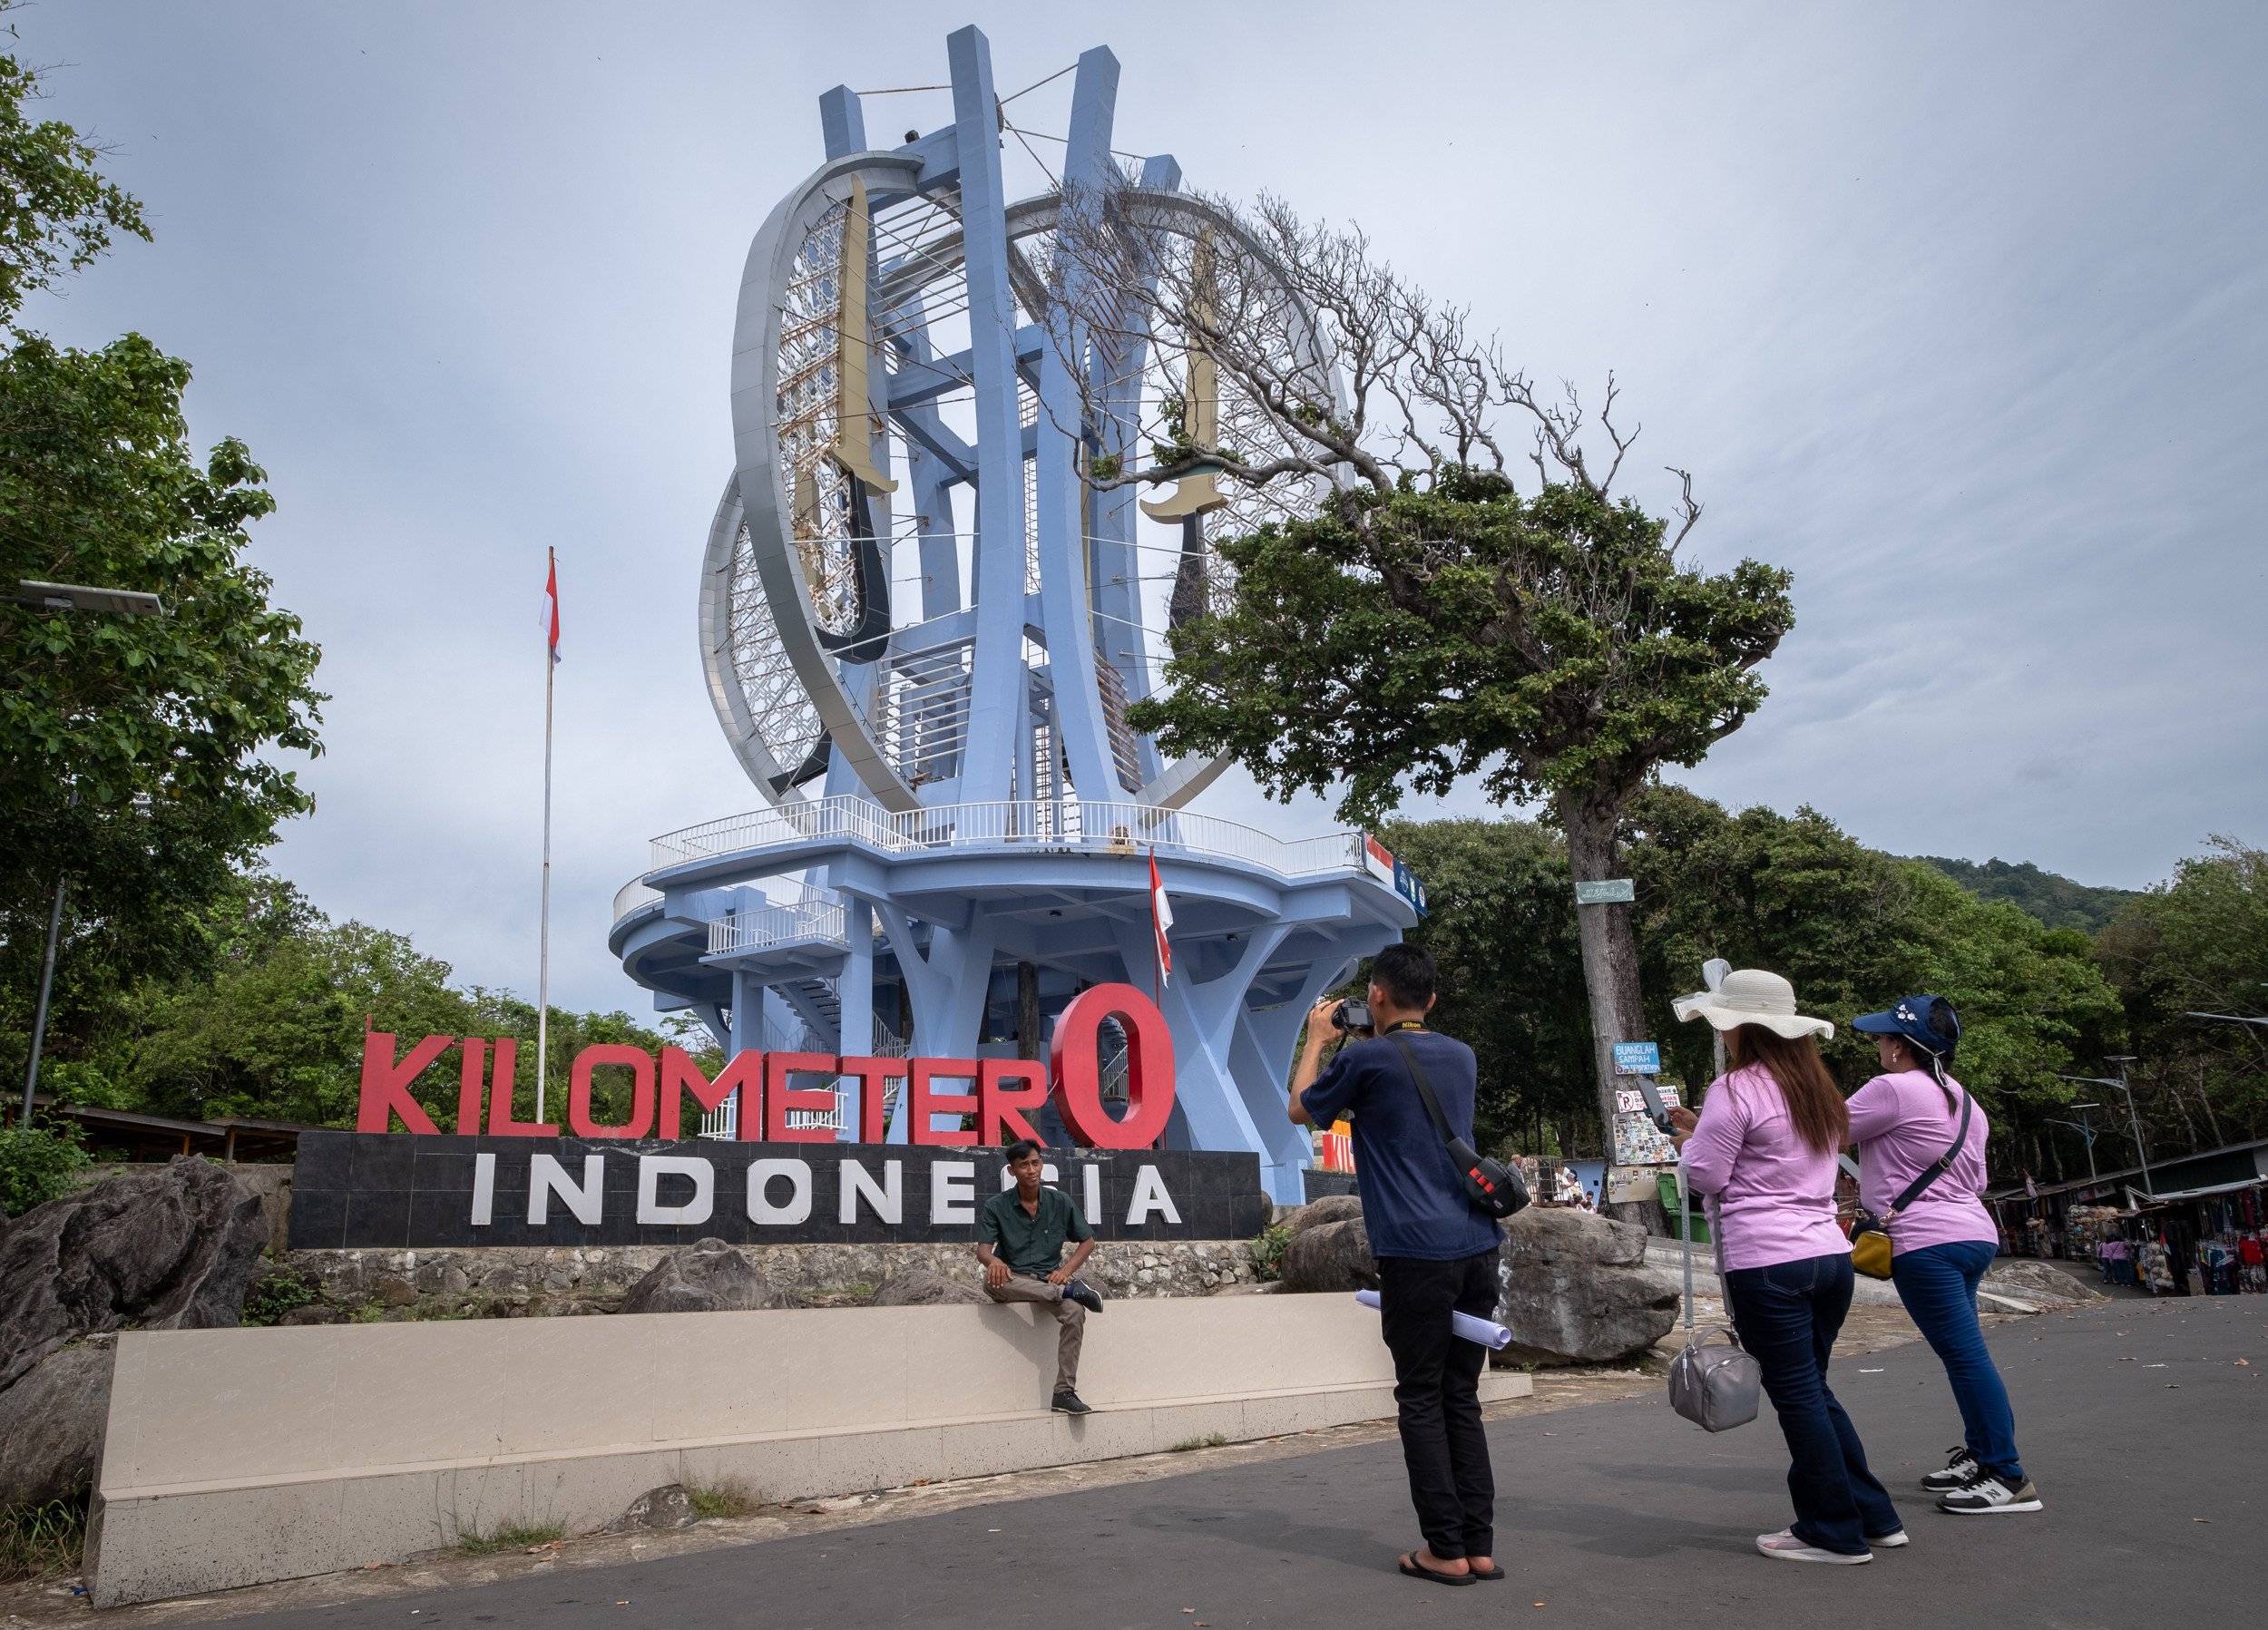 The Kilometer O Indonesia monument on Pulau Weh marks the beginning of the archipelago, Banda Aceh, Indonesia, 2023. Photo:  Chan Kit Yeng)